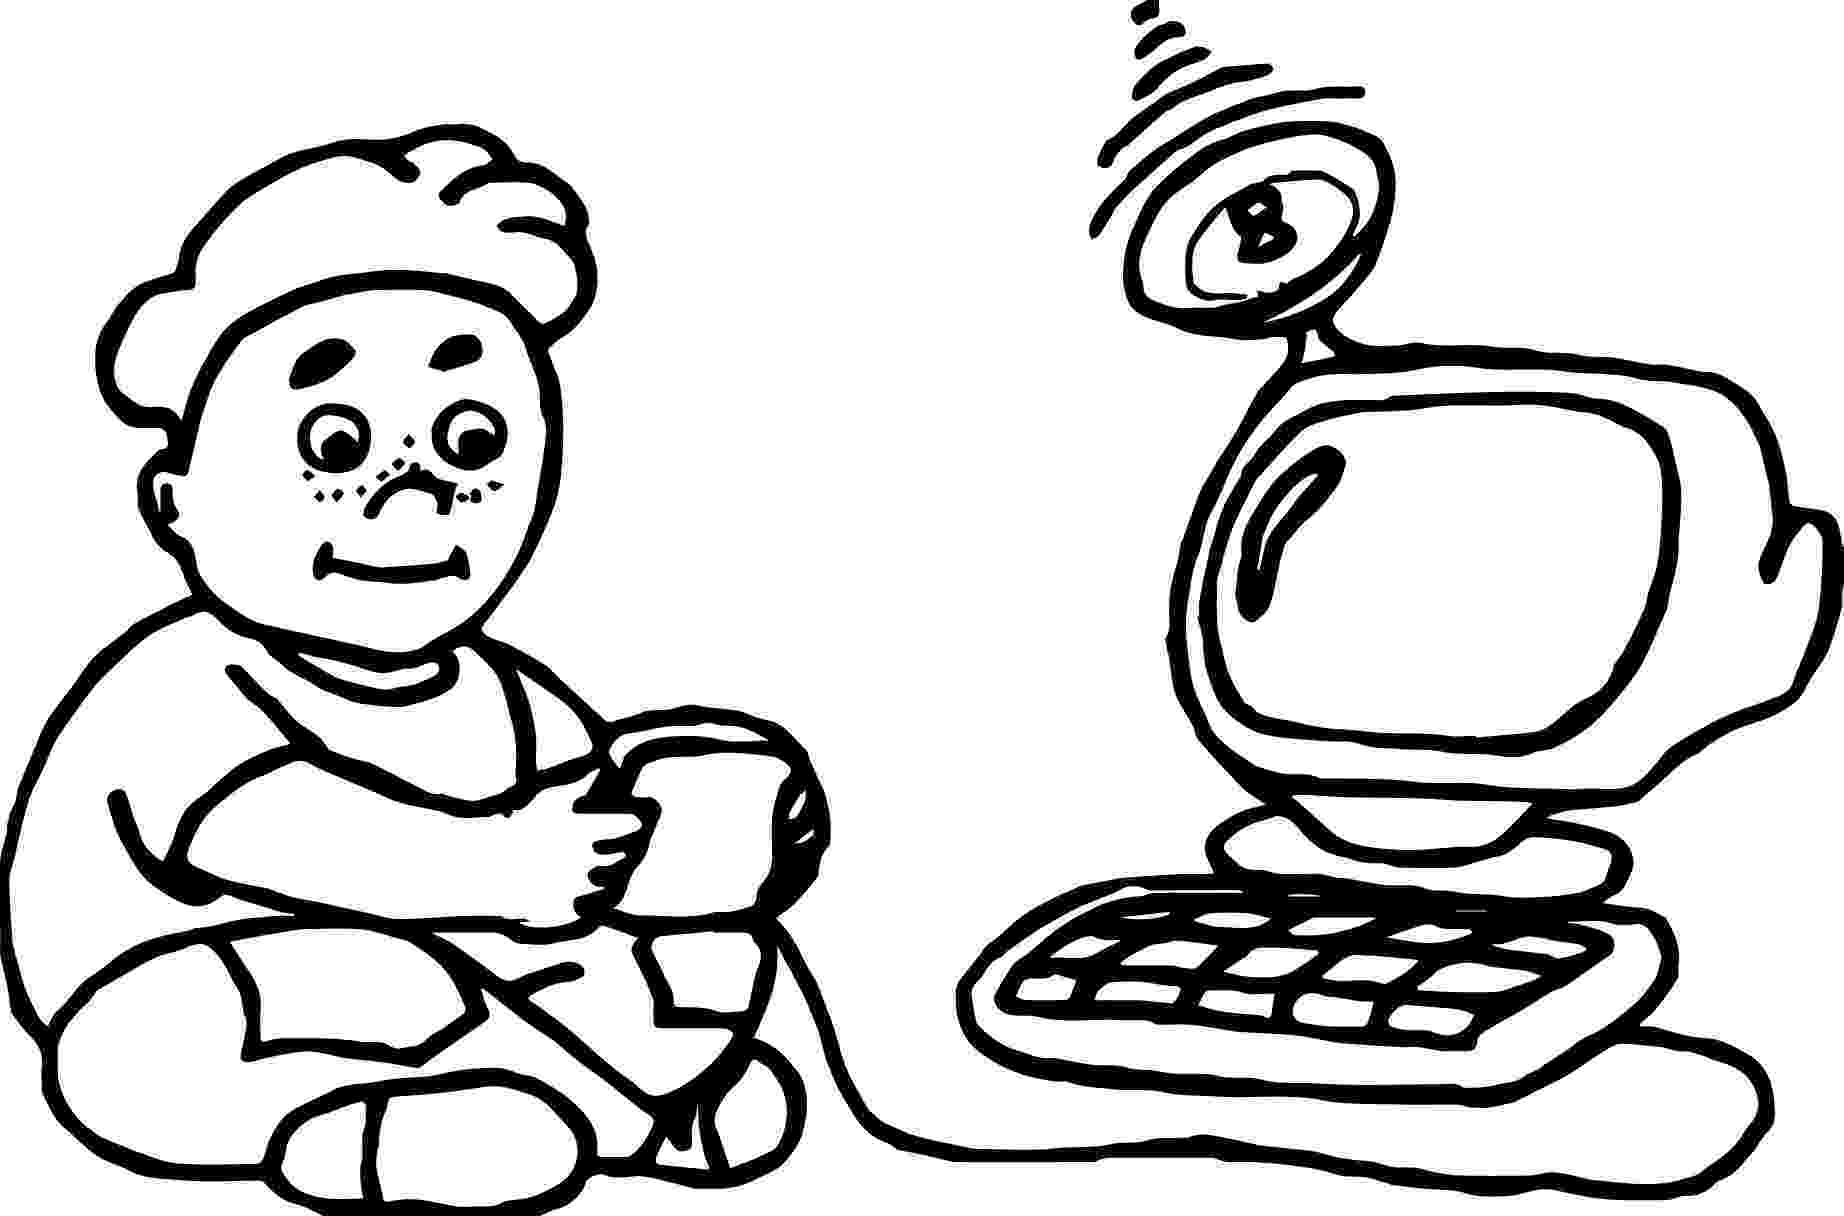 coloring picture games gamer playing computer games coloring page games picture coloring 